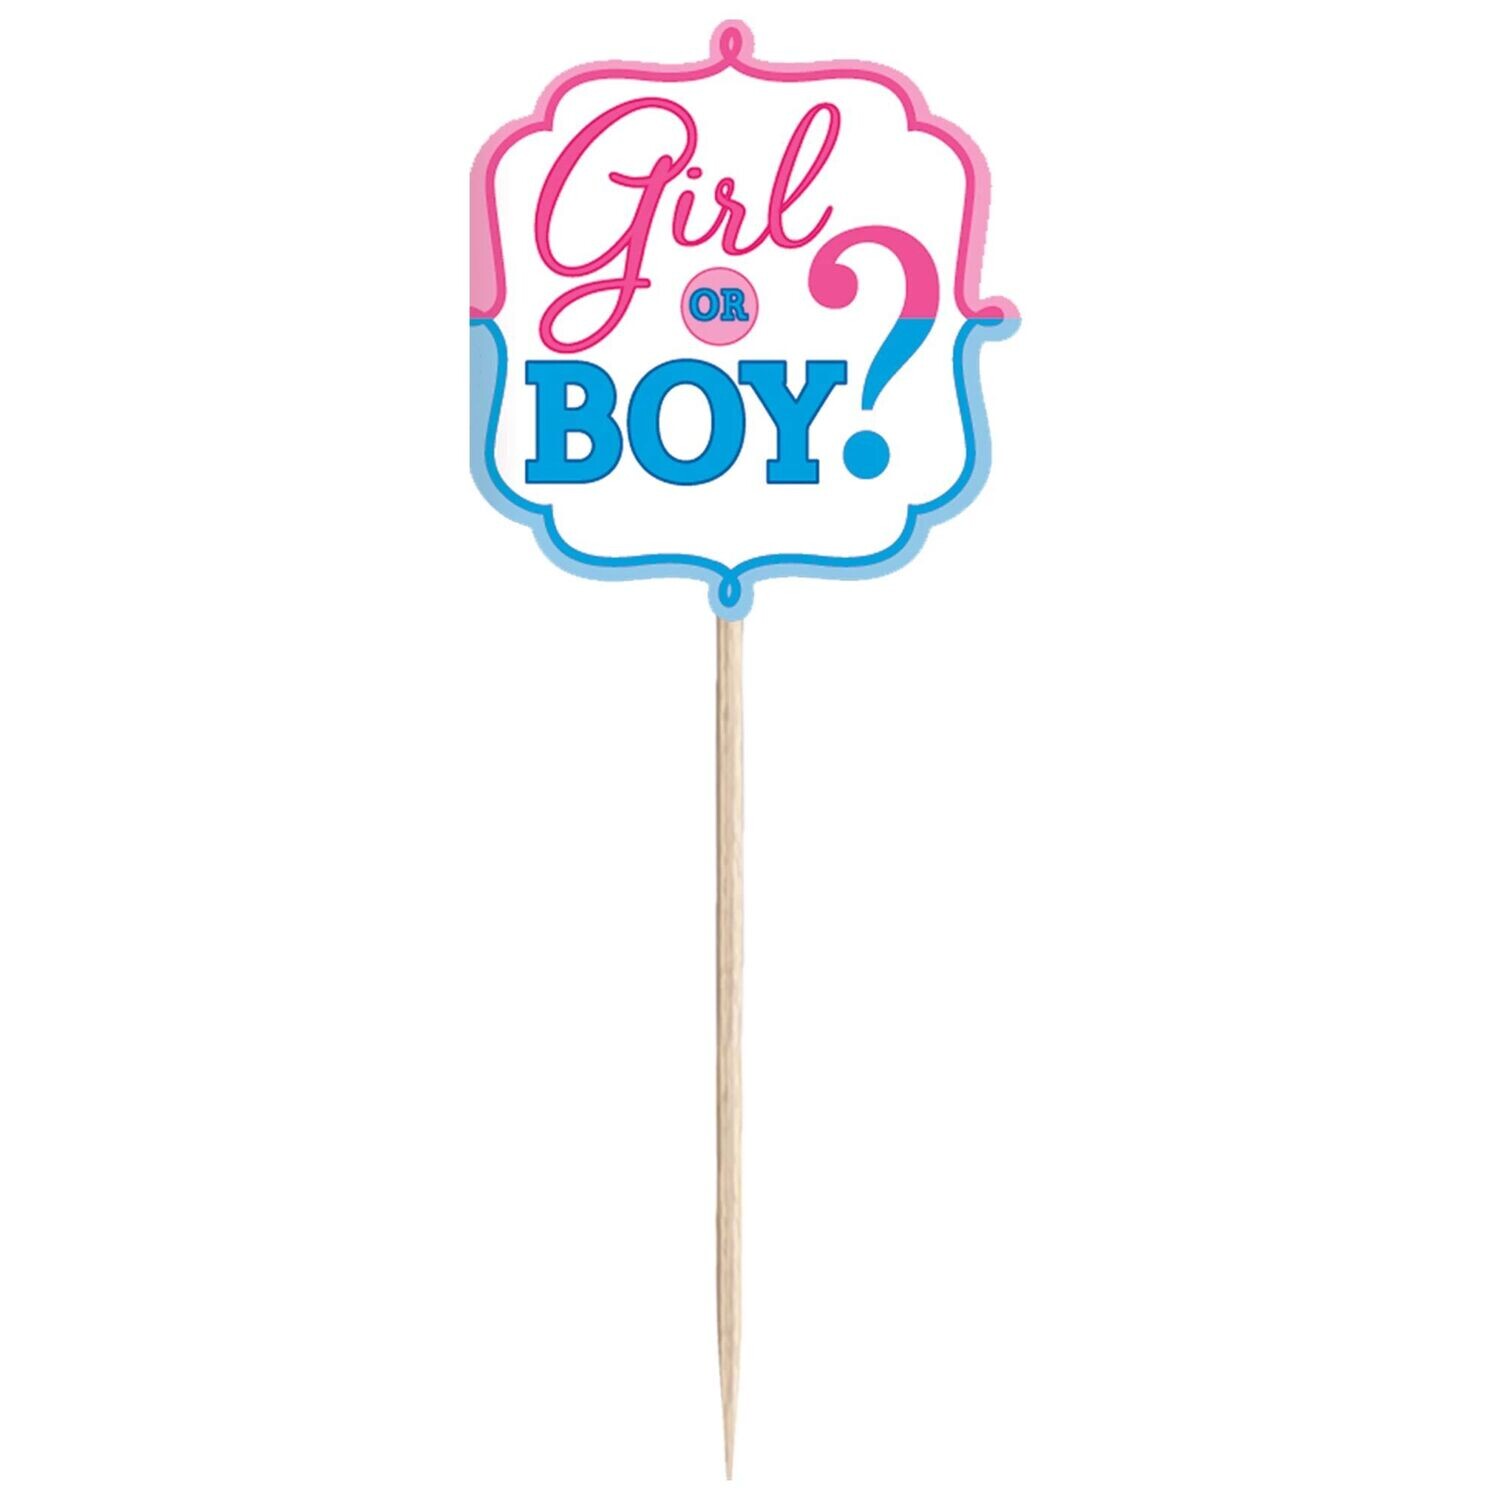 Girl or Boy? Party Picks - 36 count.